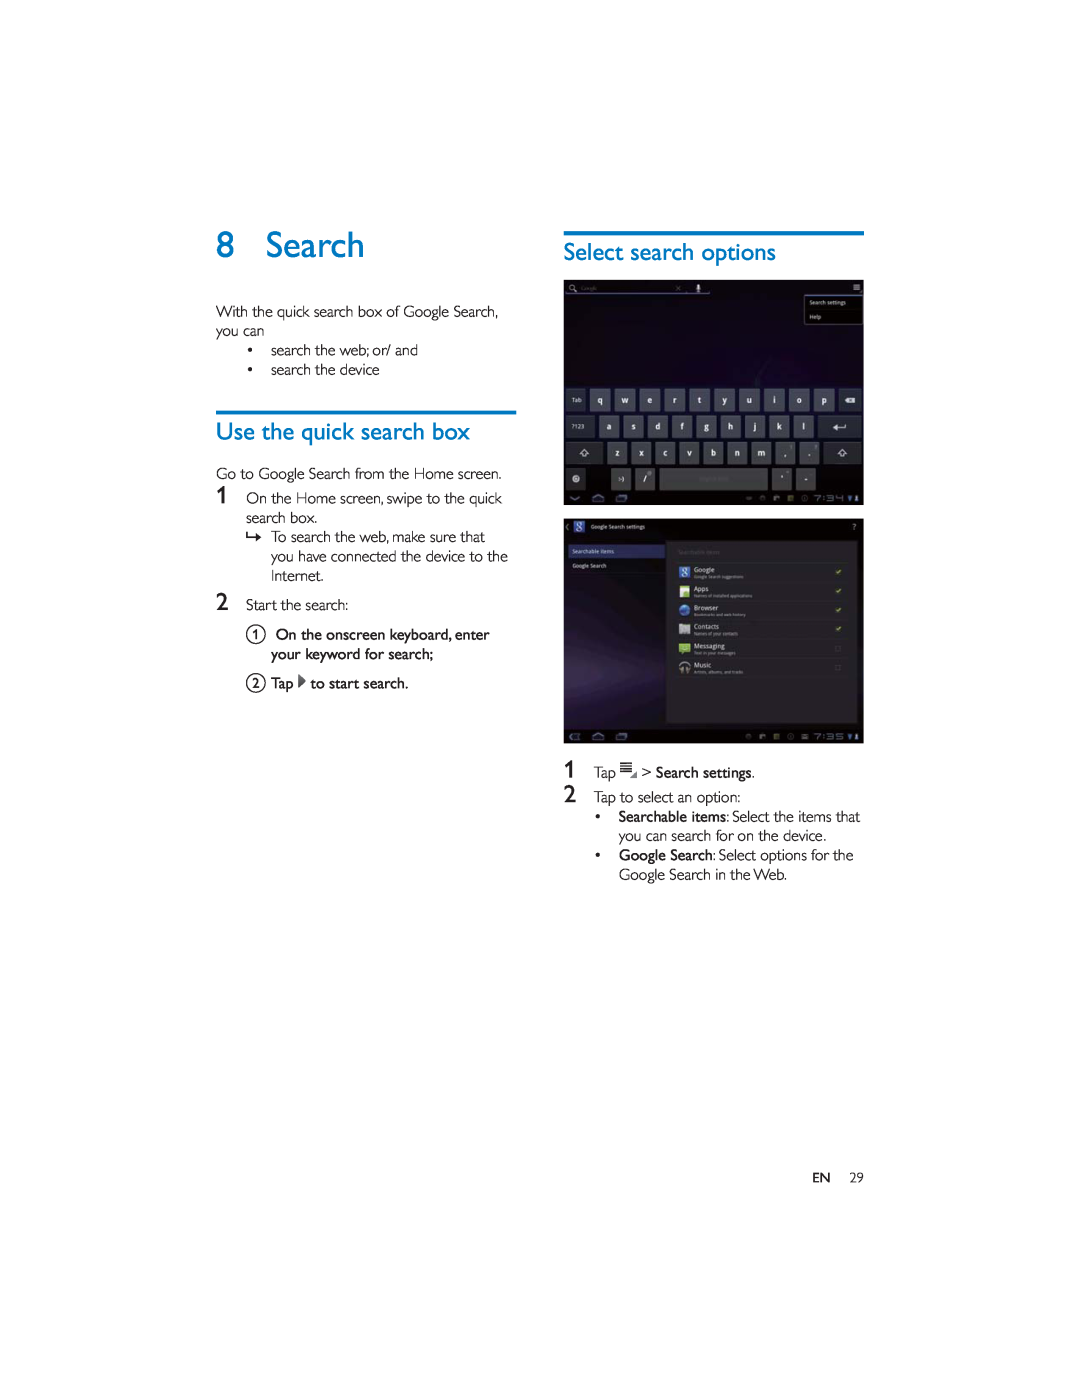 Philips PI7000/93 user manual Search, Use the quick search box, Select search options 